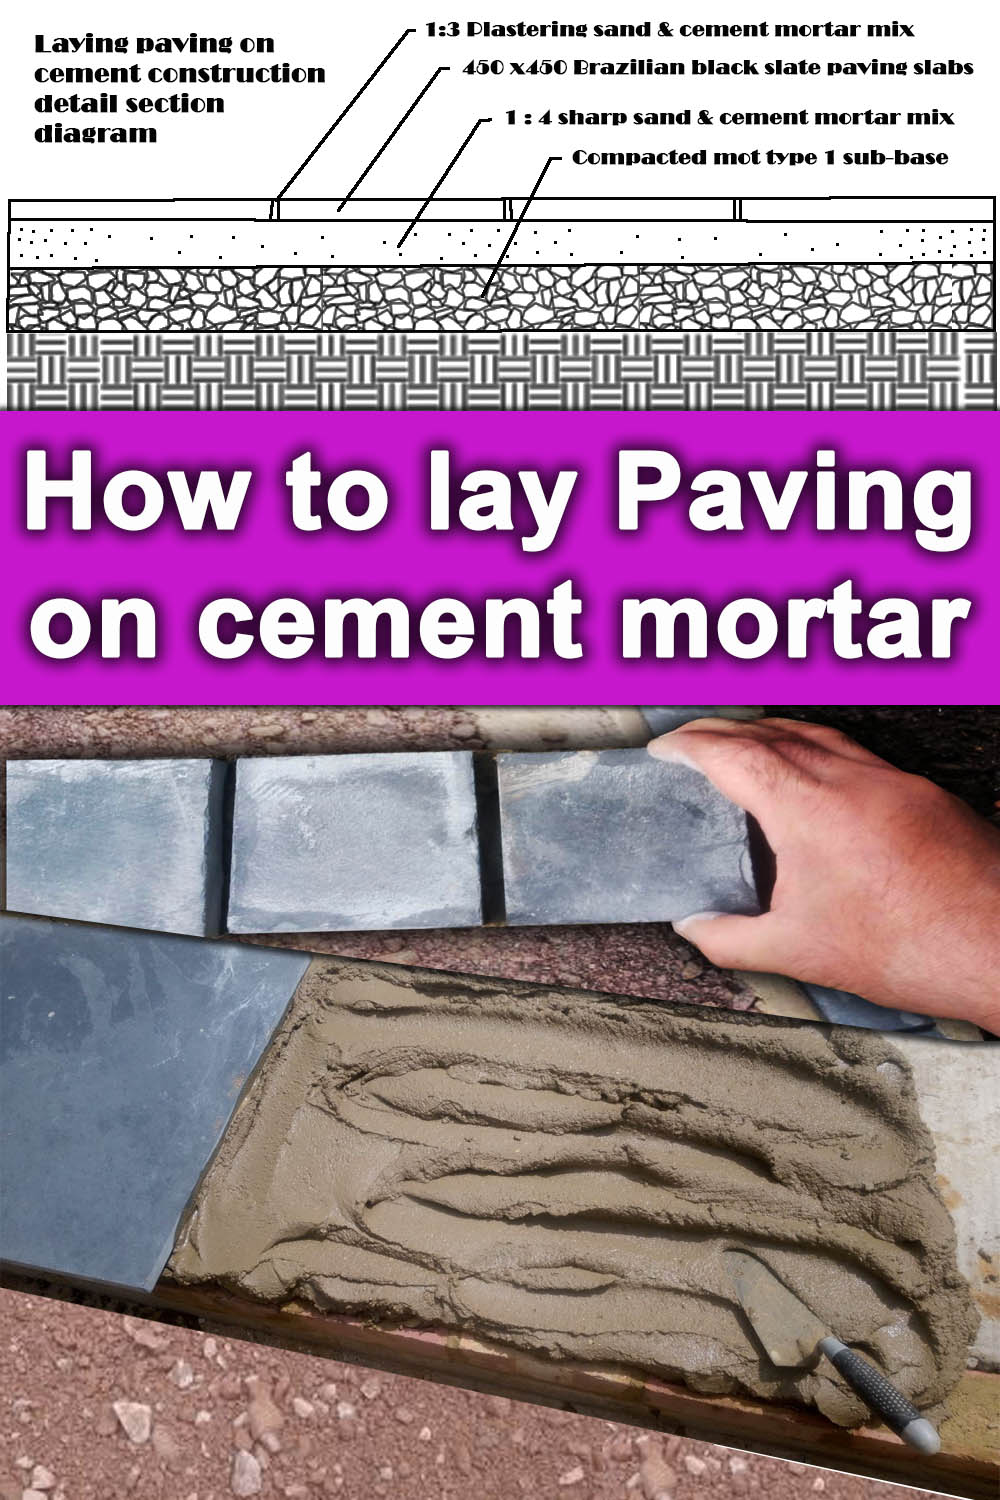 How to lay paving on cement